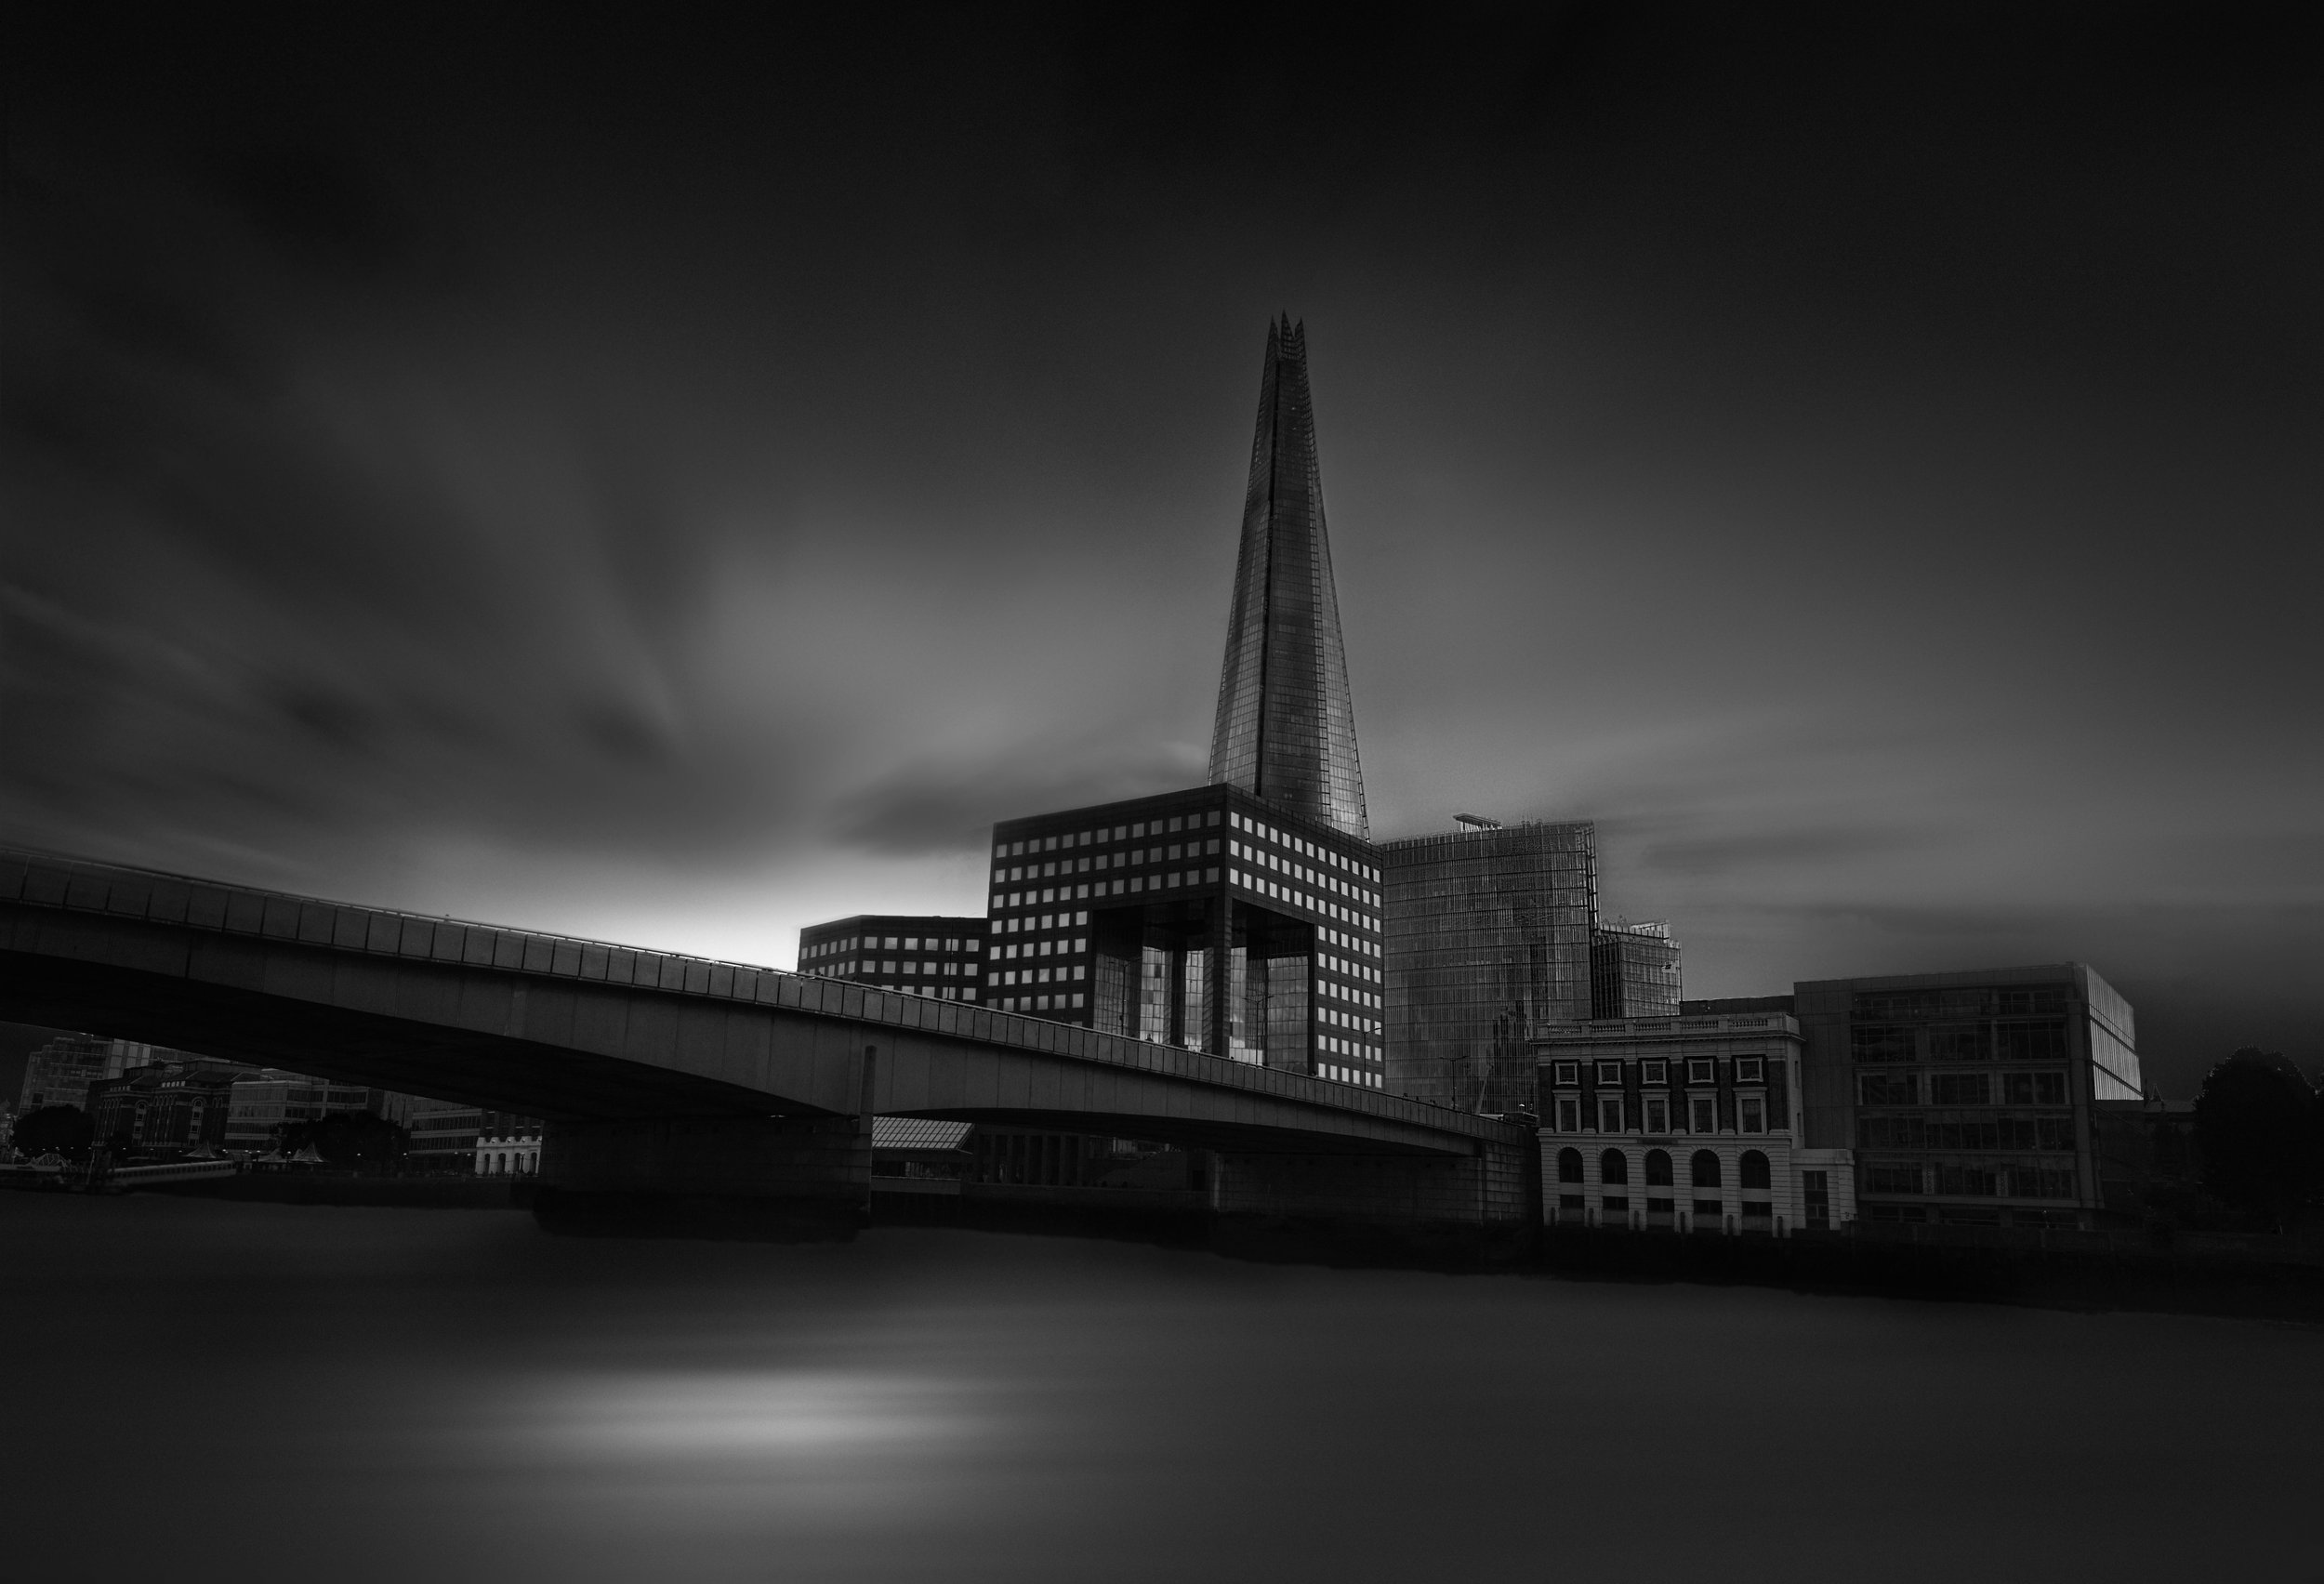 HM - The Shard of London